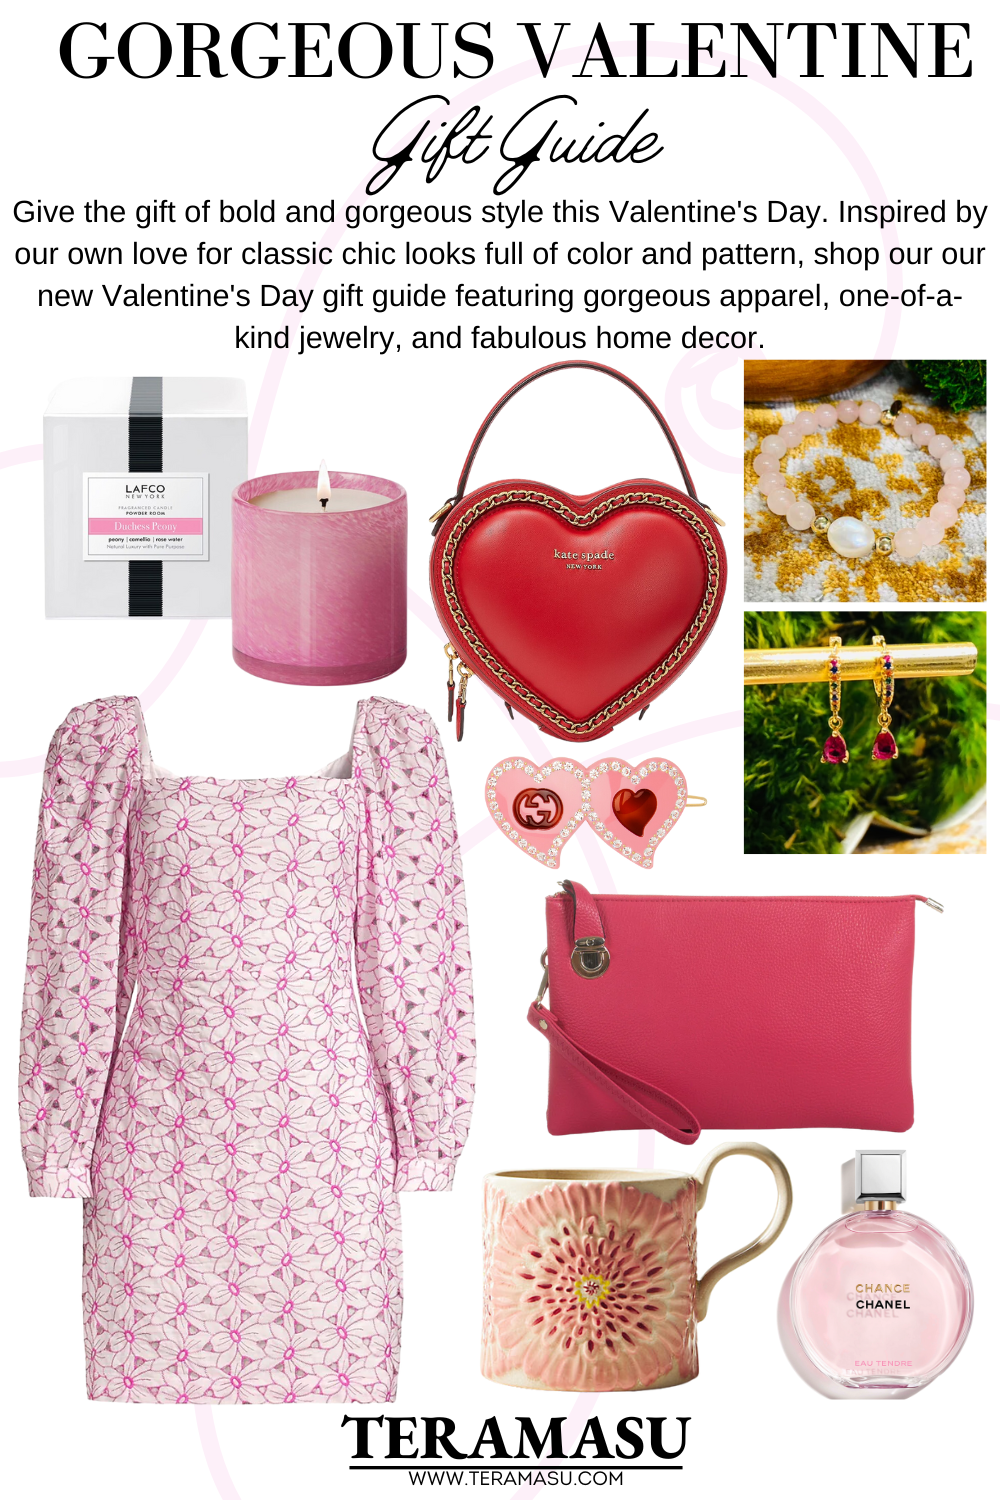 Teramasu Style Guide | Gorgeous Valentine Gift Guide